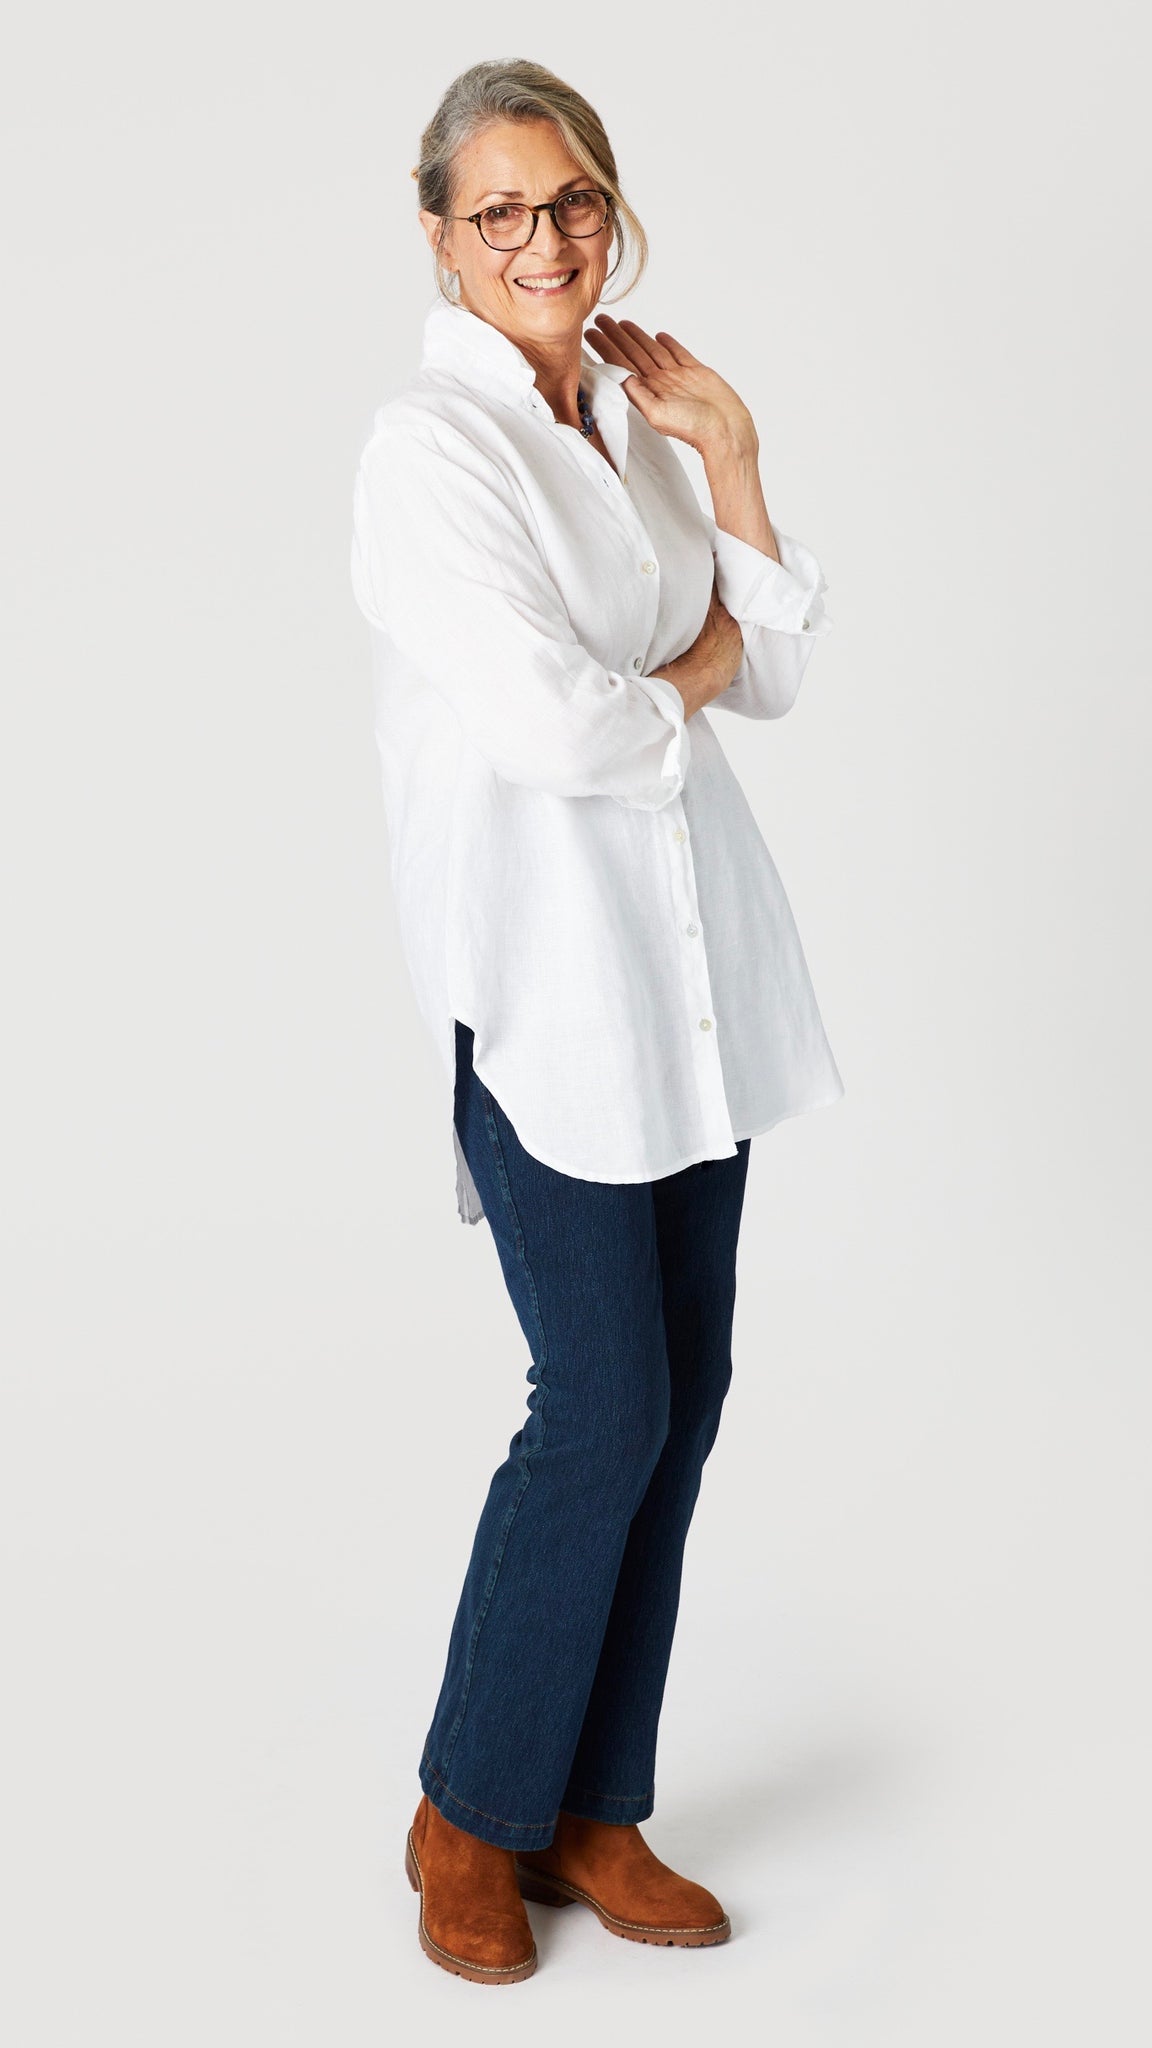 Model wearing white linen button-up shirt with collar and handkerchief hem with indigo bootcut jeans and brown suede boots.